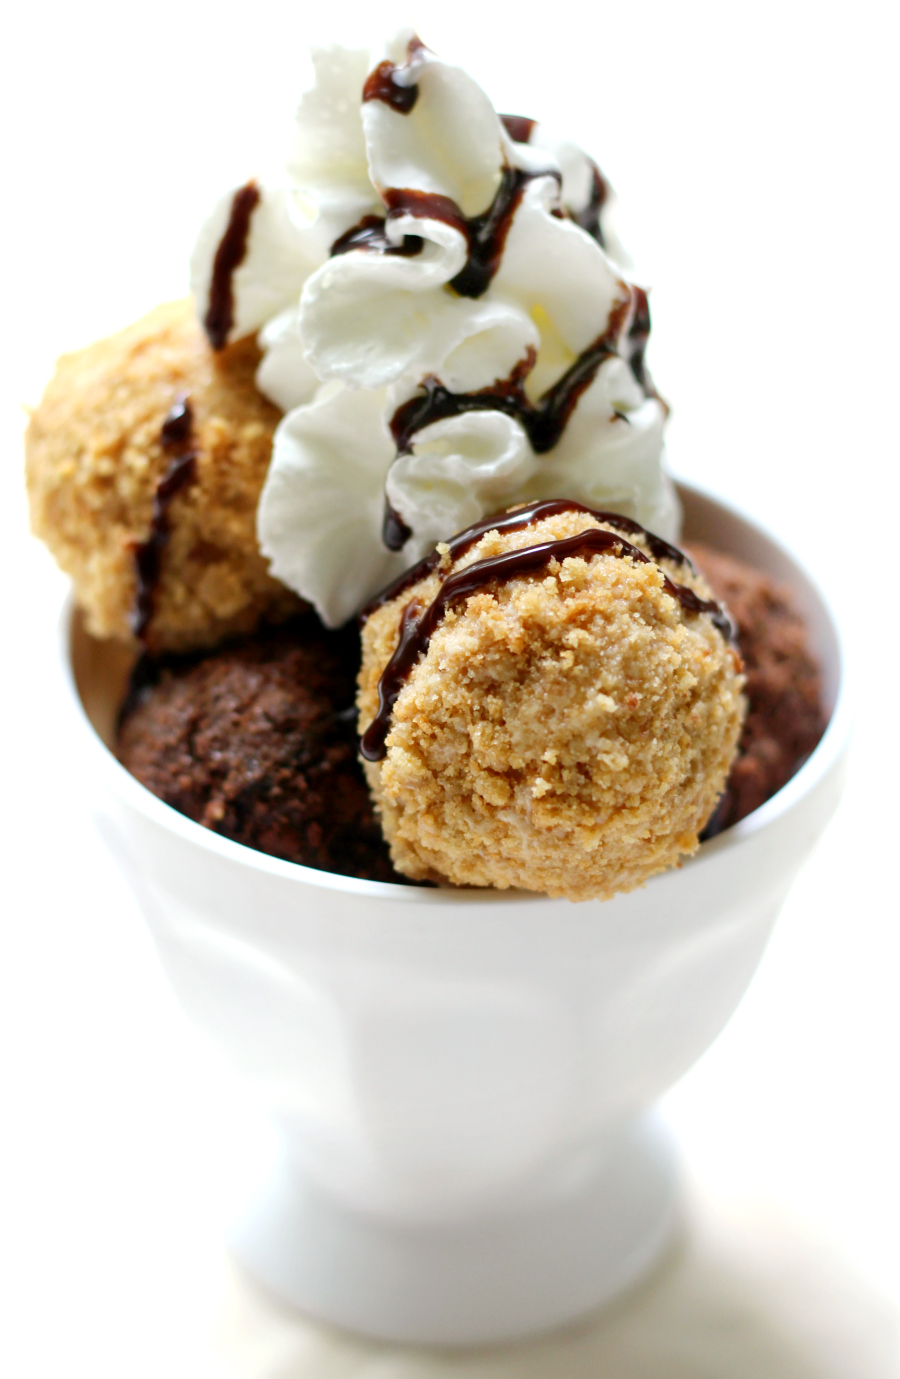 Vegan "Fried" Ice Cream Bombs | Strength and Sunshine @RebeccaGF666 An easy and fun dessert treat that will bring out the "kid" in all of us! Gluten-Free Vegan "Fried" Ice Cream Bombs! Balls of ice cream rolled in crushed cookie crumbs! This is a must-make, no-bake recipe with your kids!